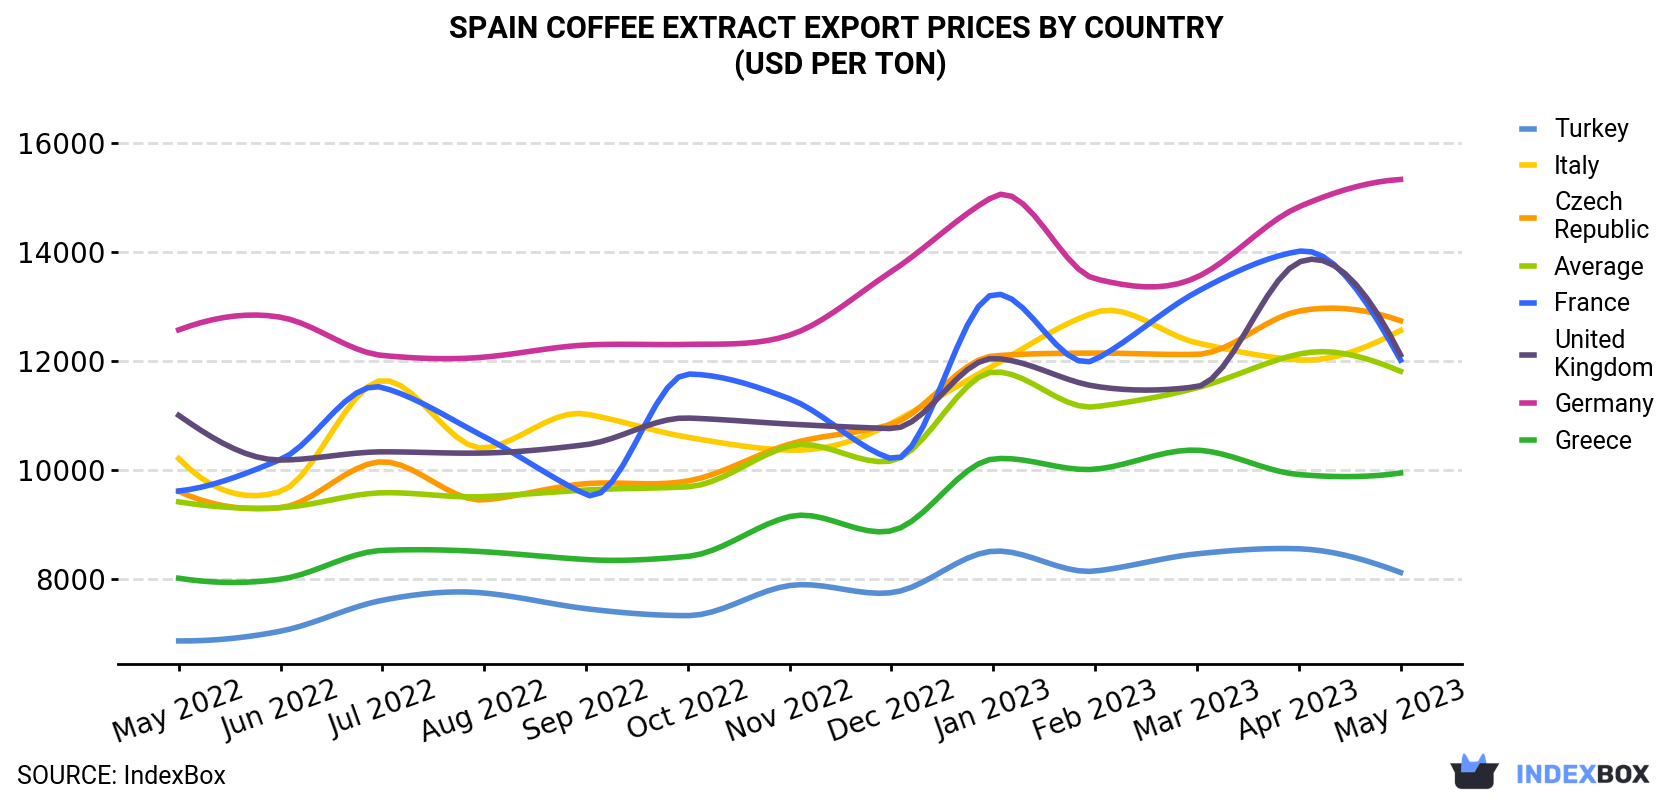 Spain Coffee Extract Export Prices By Country (USD Per Ton)